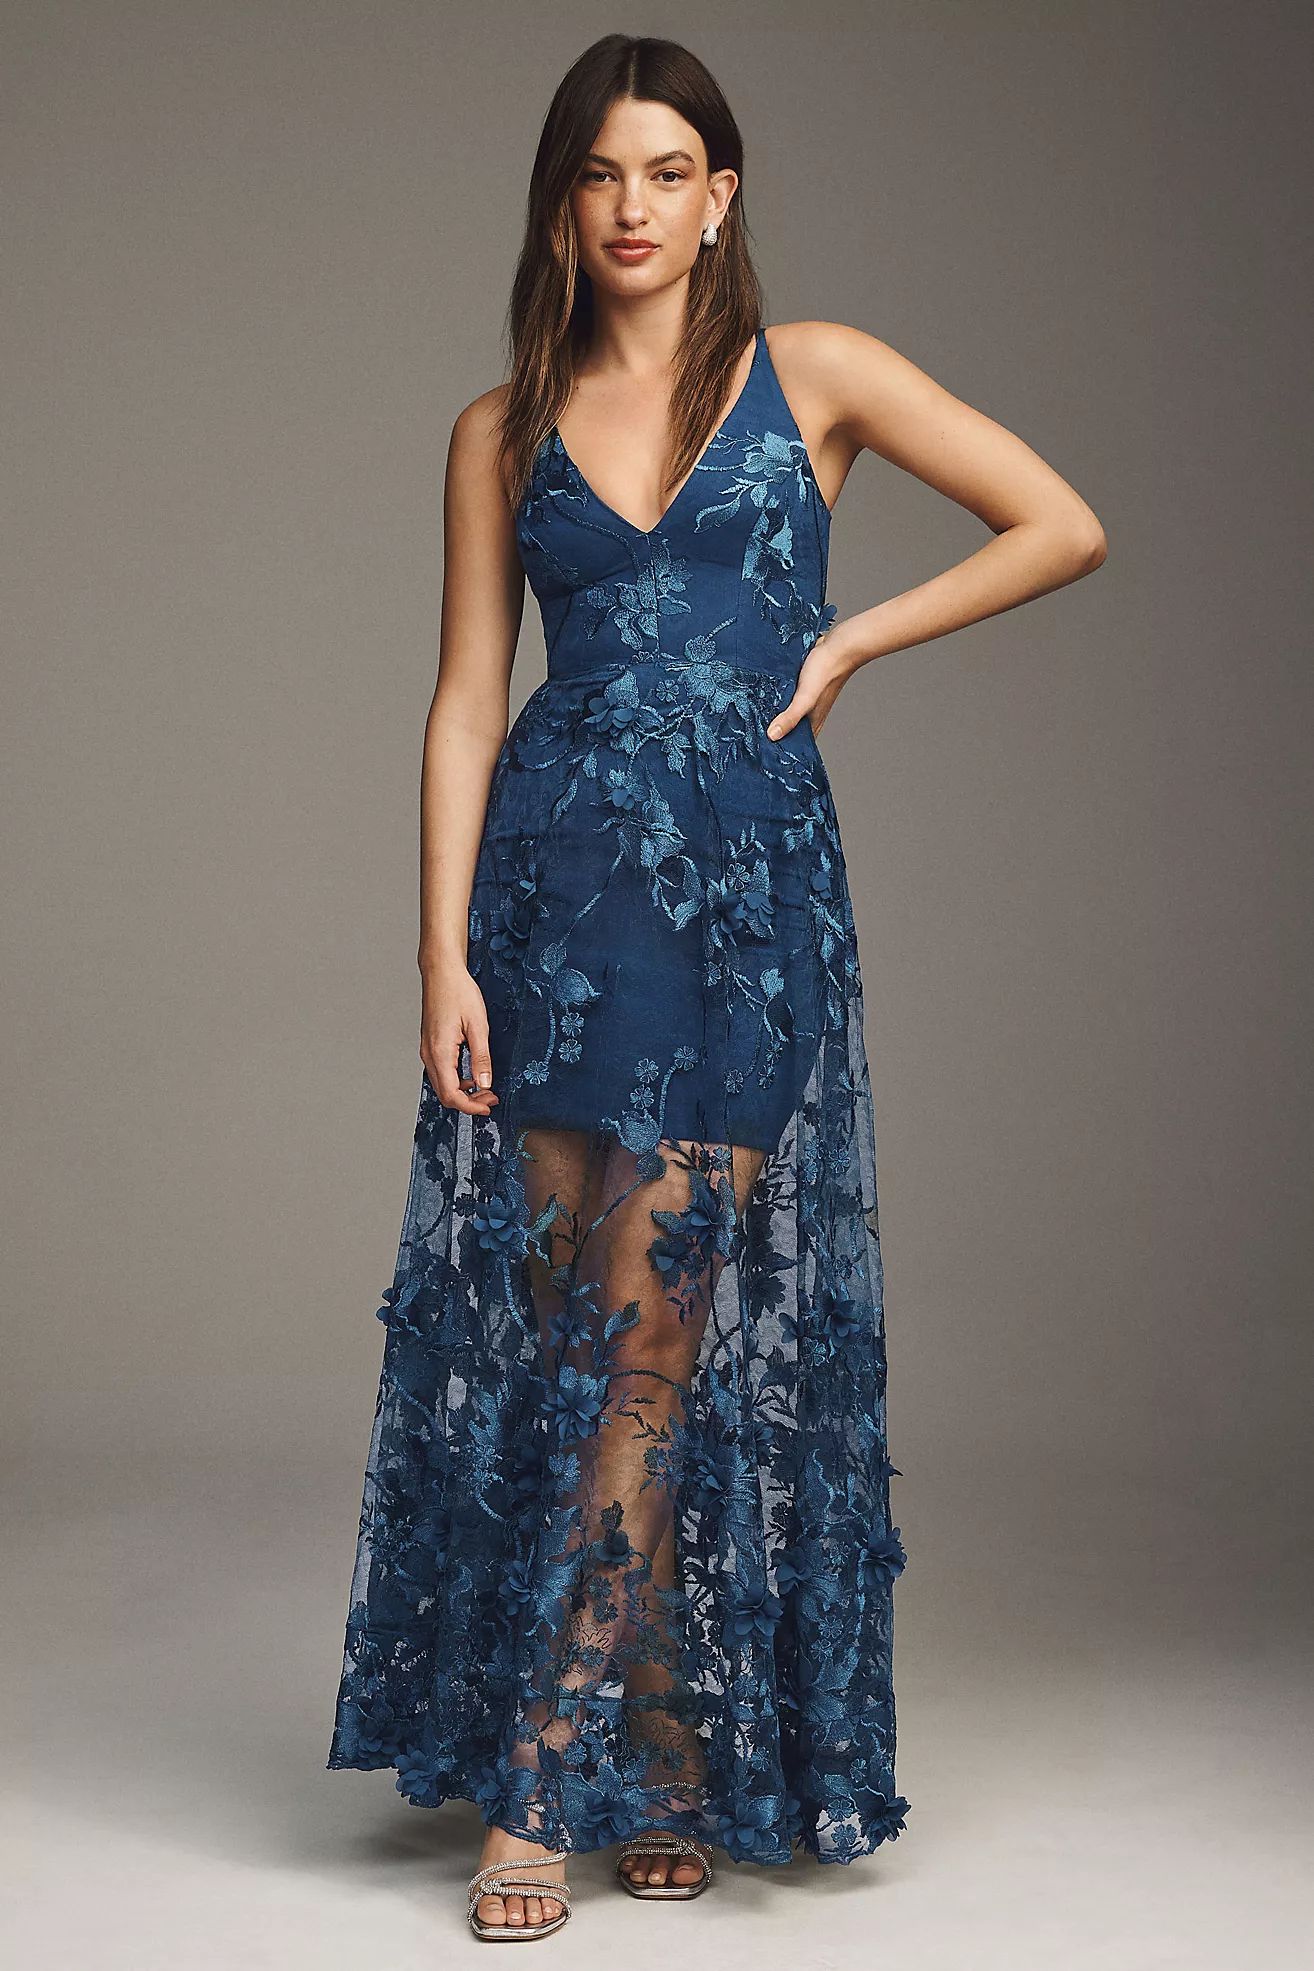 Dress The Population Sidney A-Line Sheer Lace Floral Appliqué Gown | Anthropologie (US)